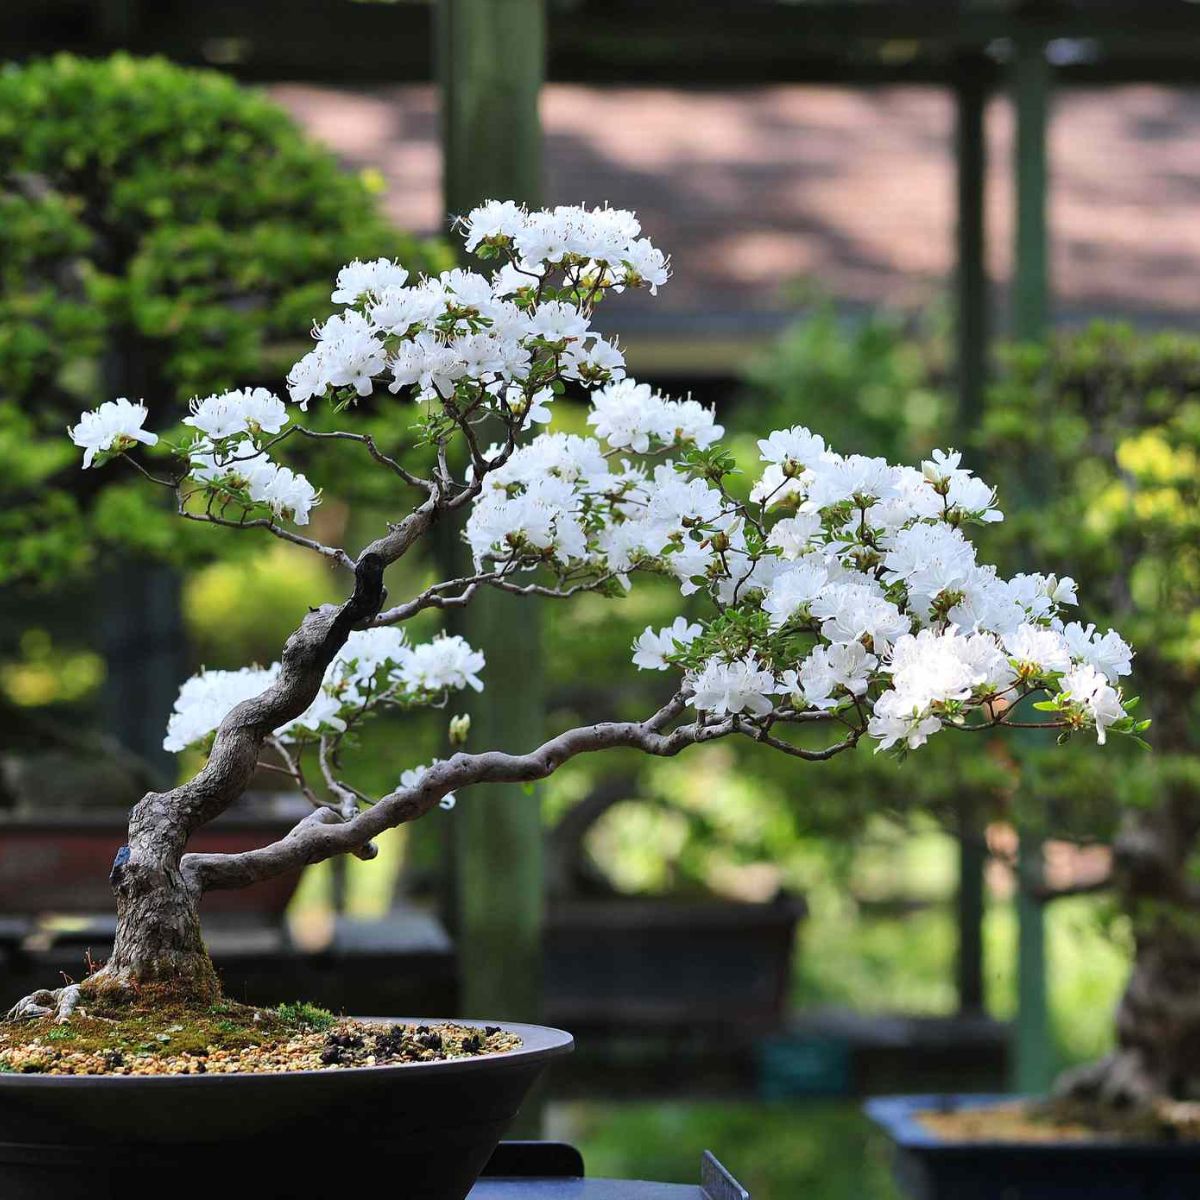 A great bonsai option for your home is the Thursday Japanese Cherry Blossom.